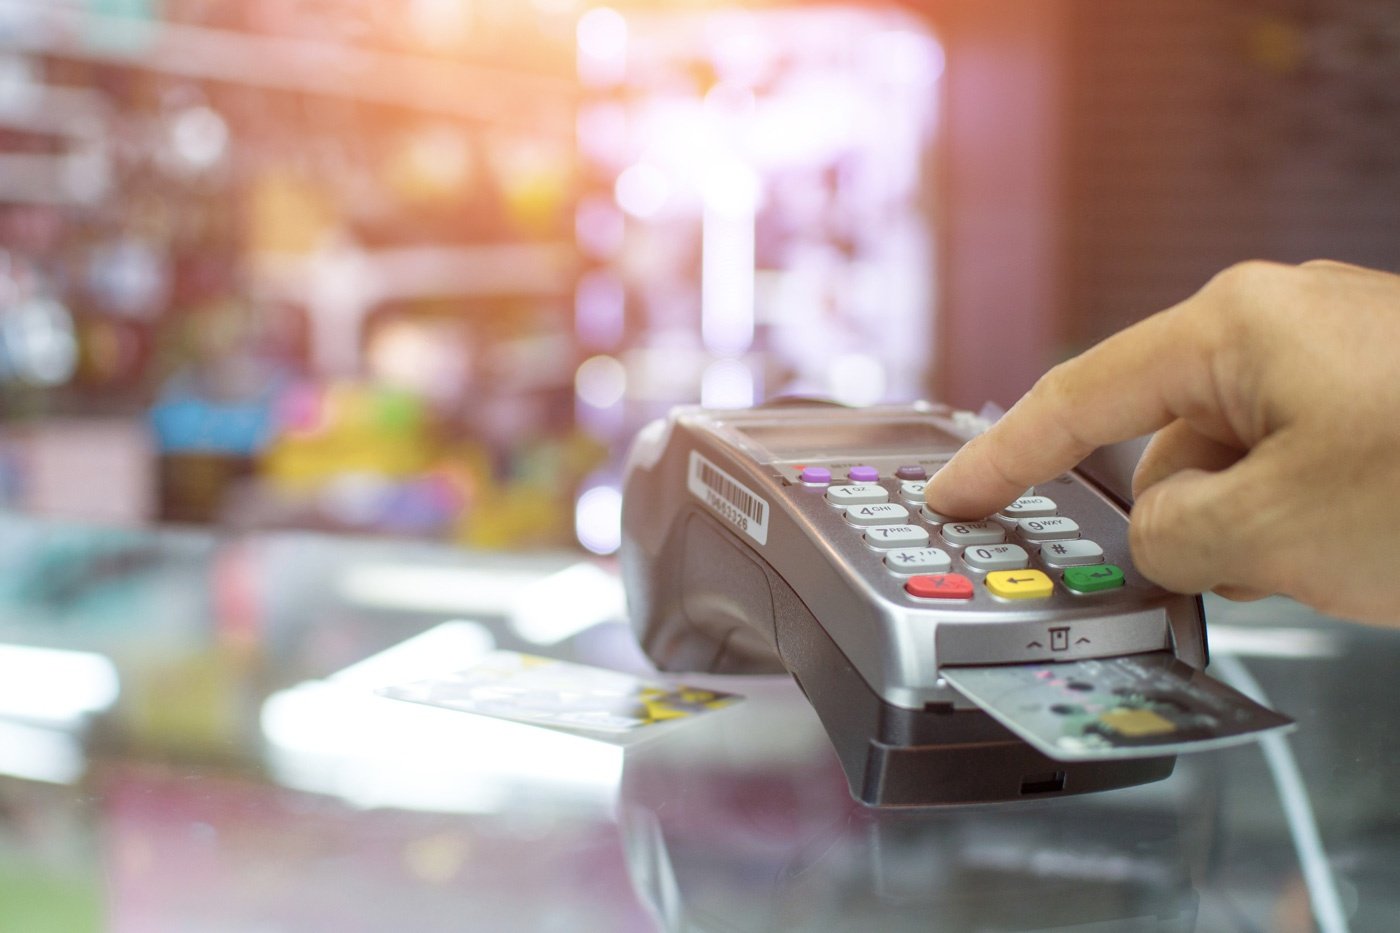 Three Best Practices to Prevent Credit Card Skimmers in Your Store